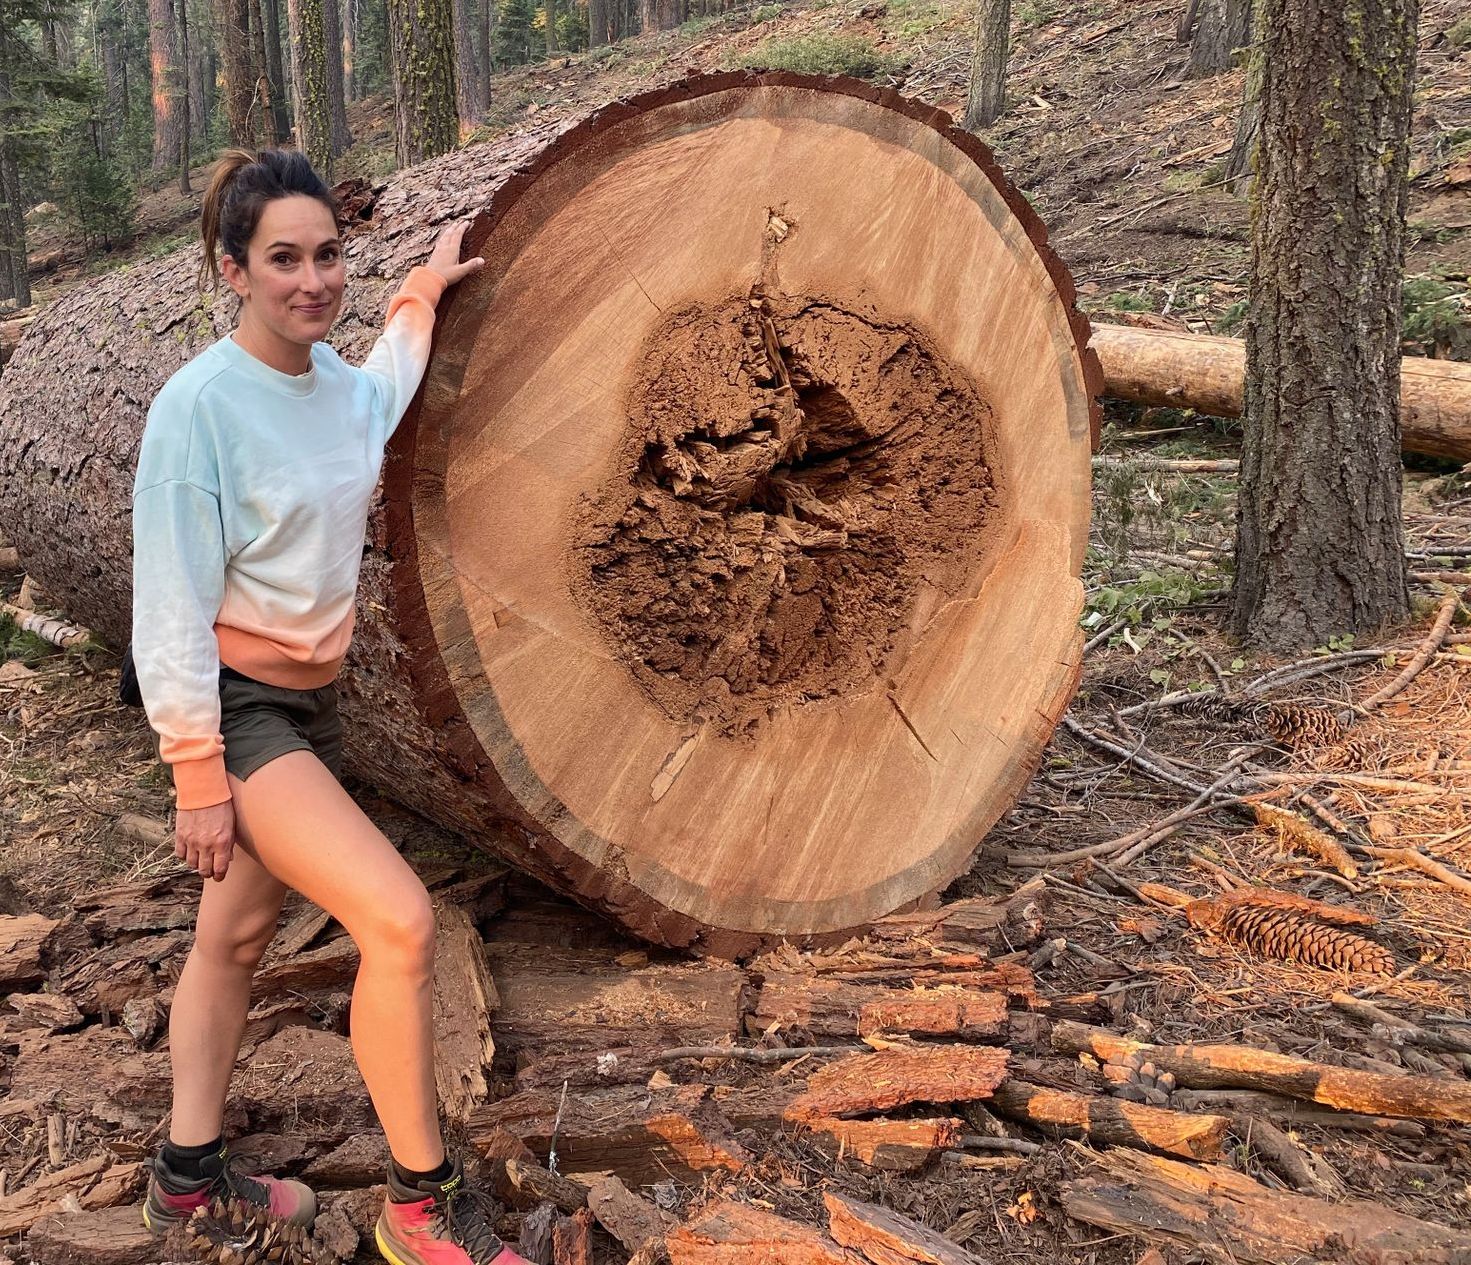 Image of woman standing next to large cross section of a tree with rotted core